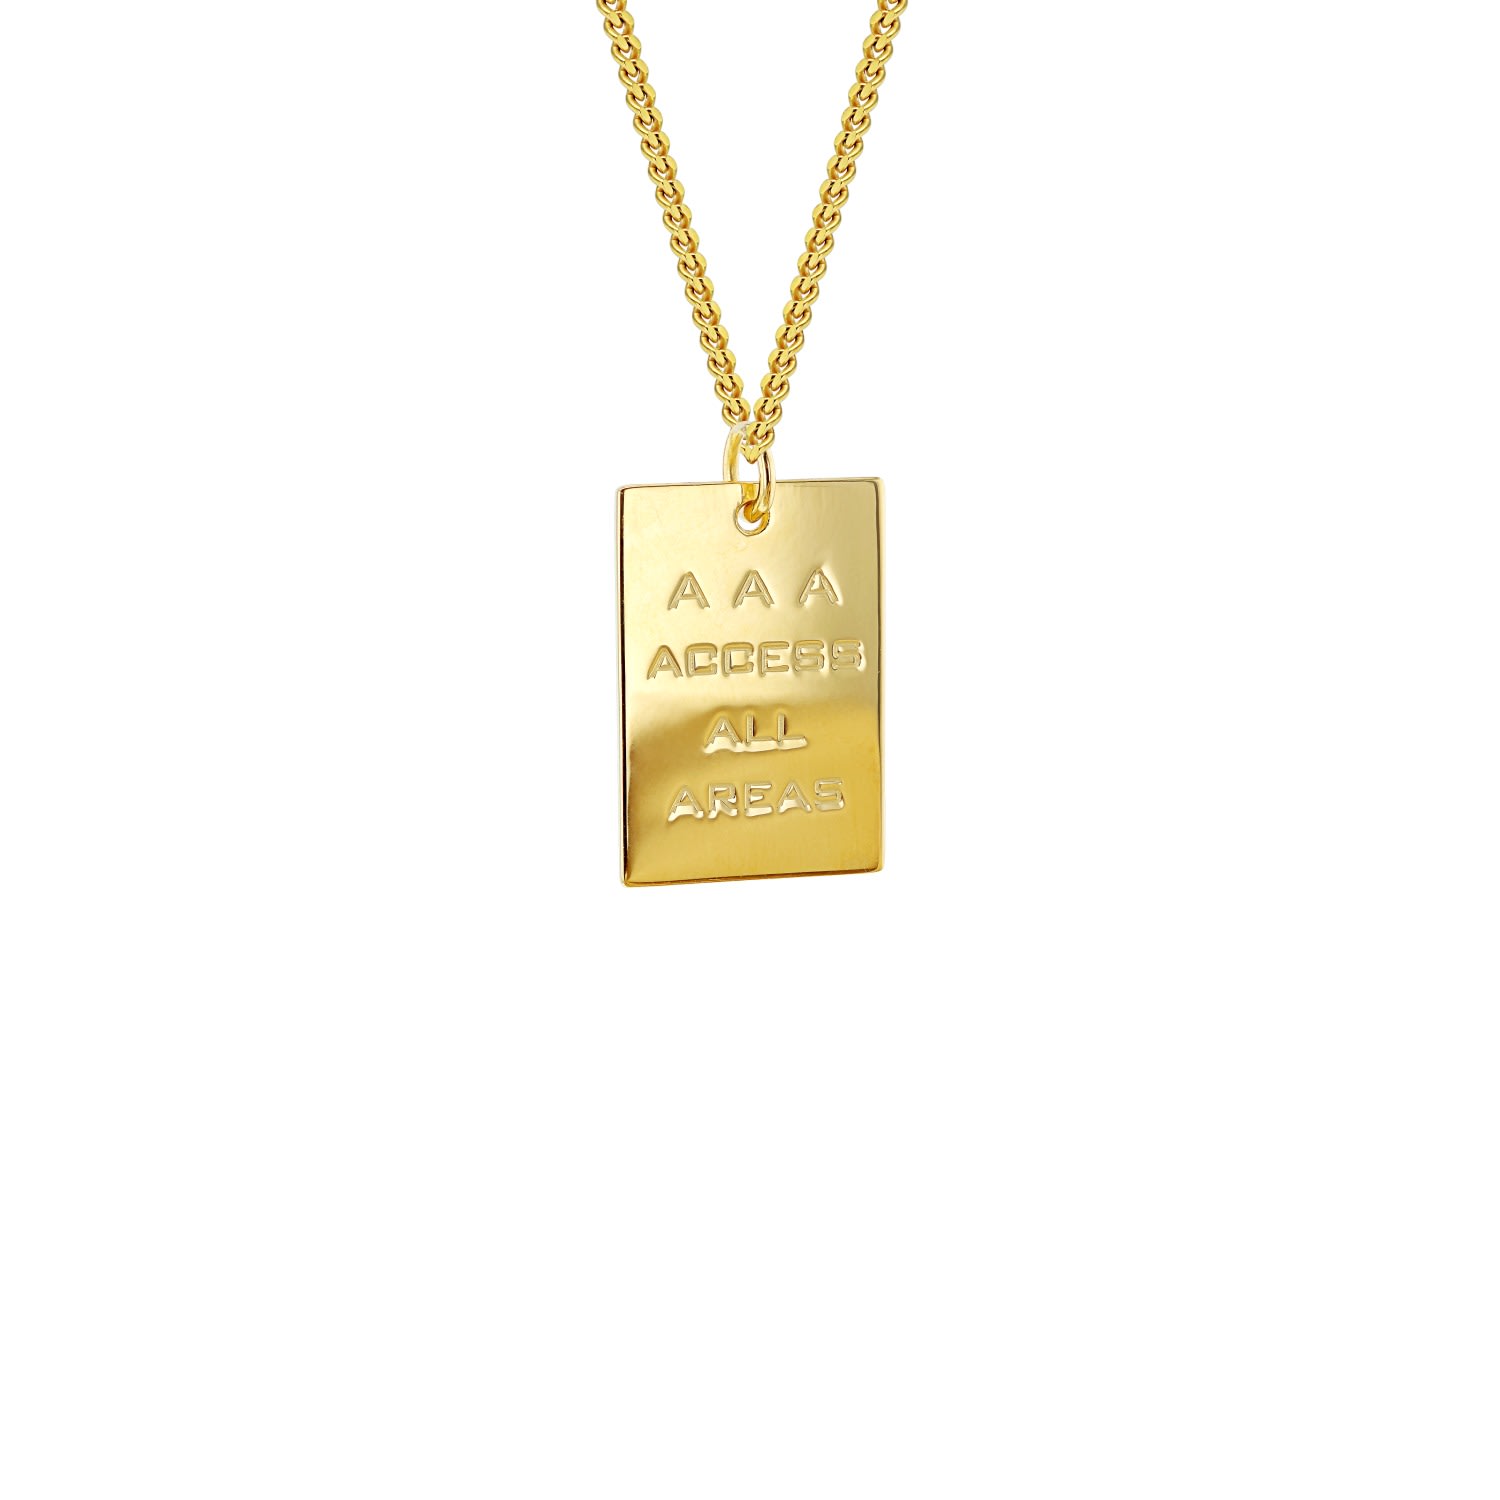 Men's 18Kt Gold Plated Access All Areas Pass Pendant True Rocks